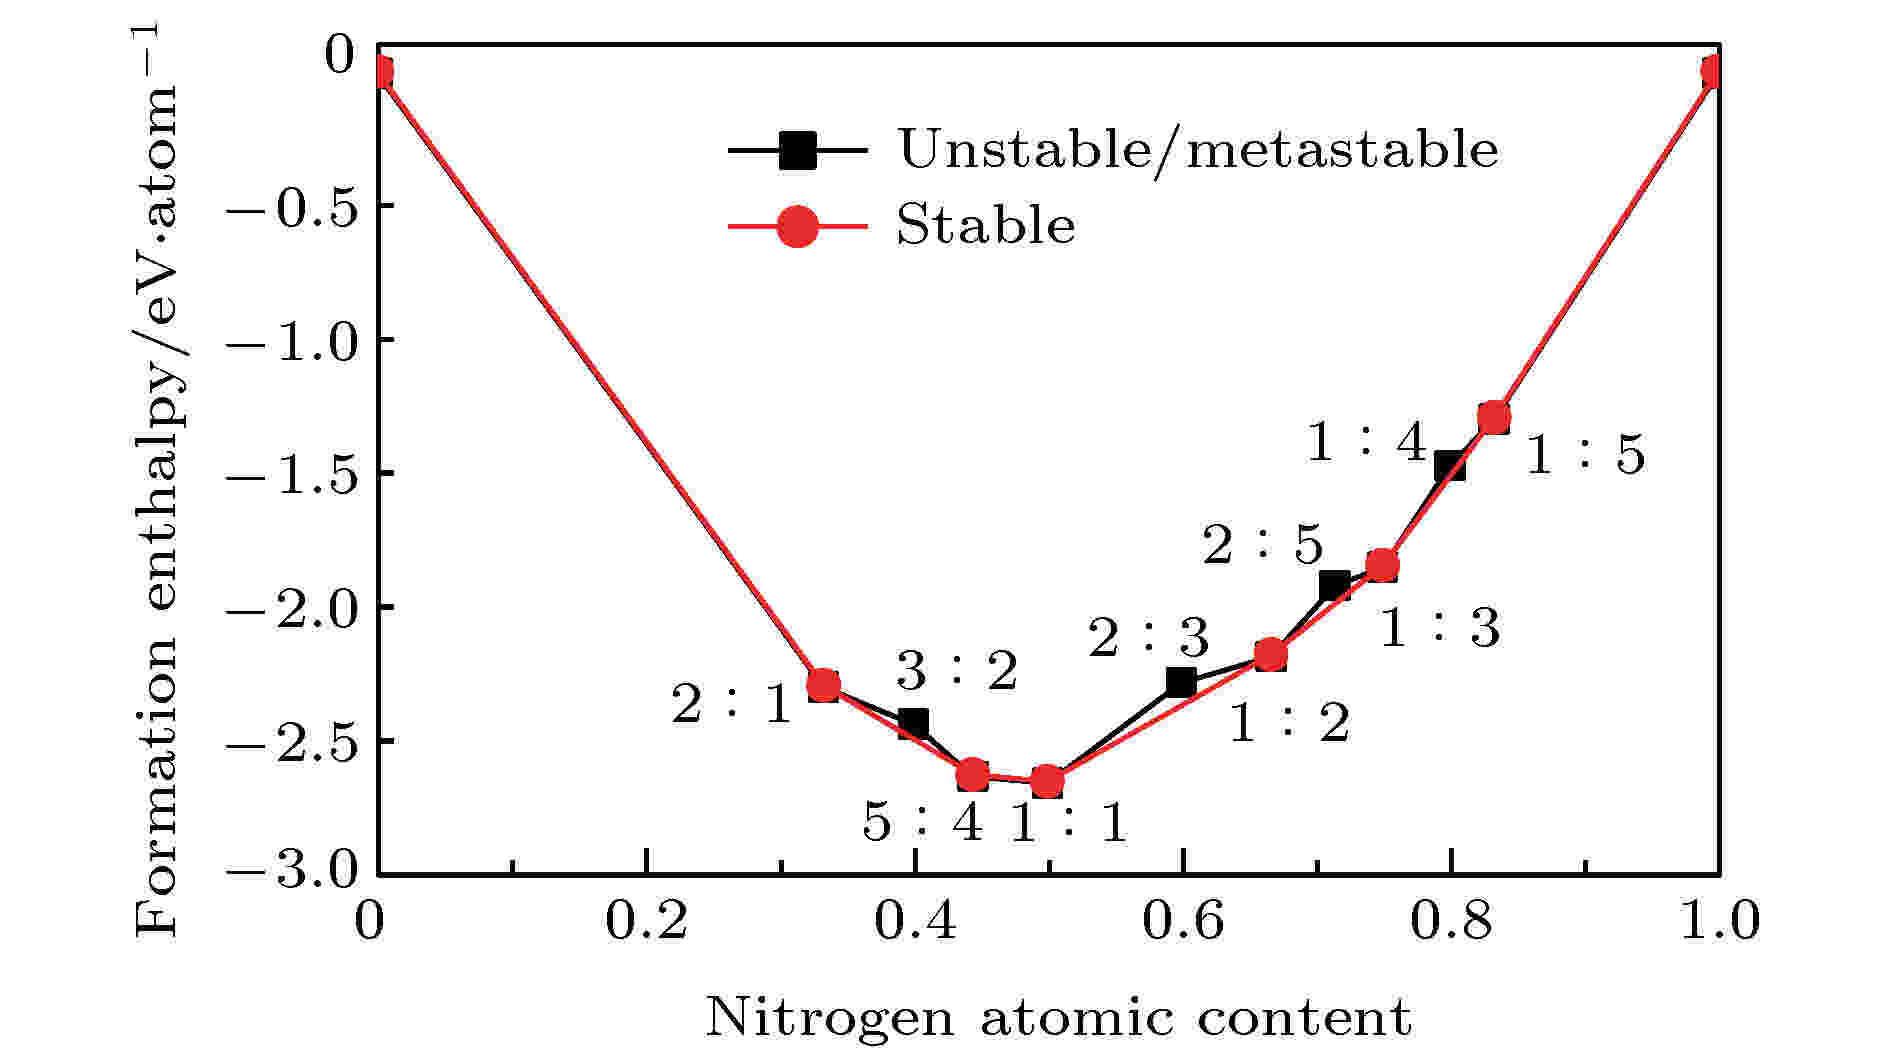 Stable phases on the convex hulls of Ca-N system at 100 GPa.